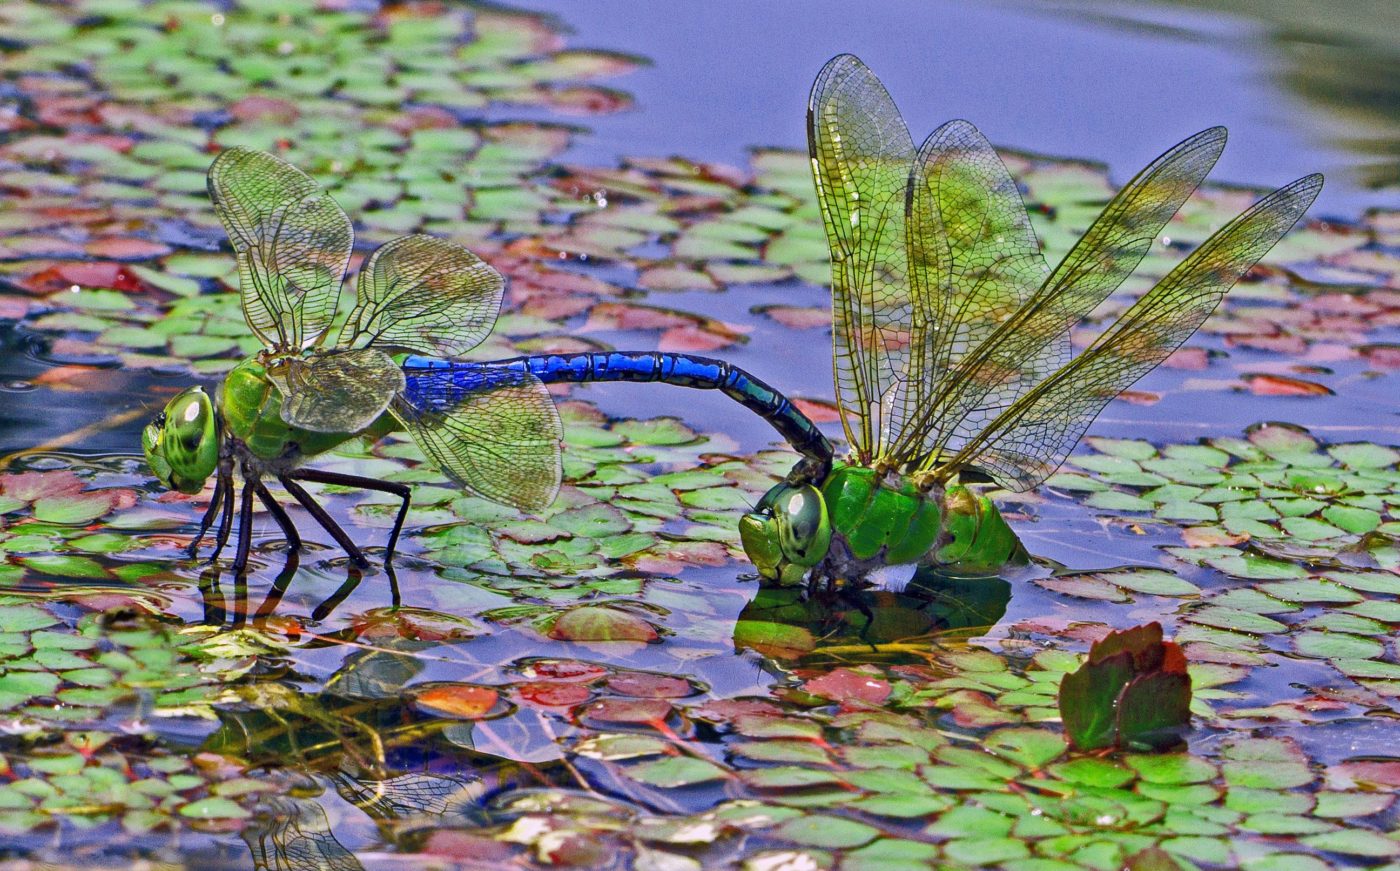 Common green darners, Anax junius, mating on the pond near the Cleveland Botanical Gardens restaurant.